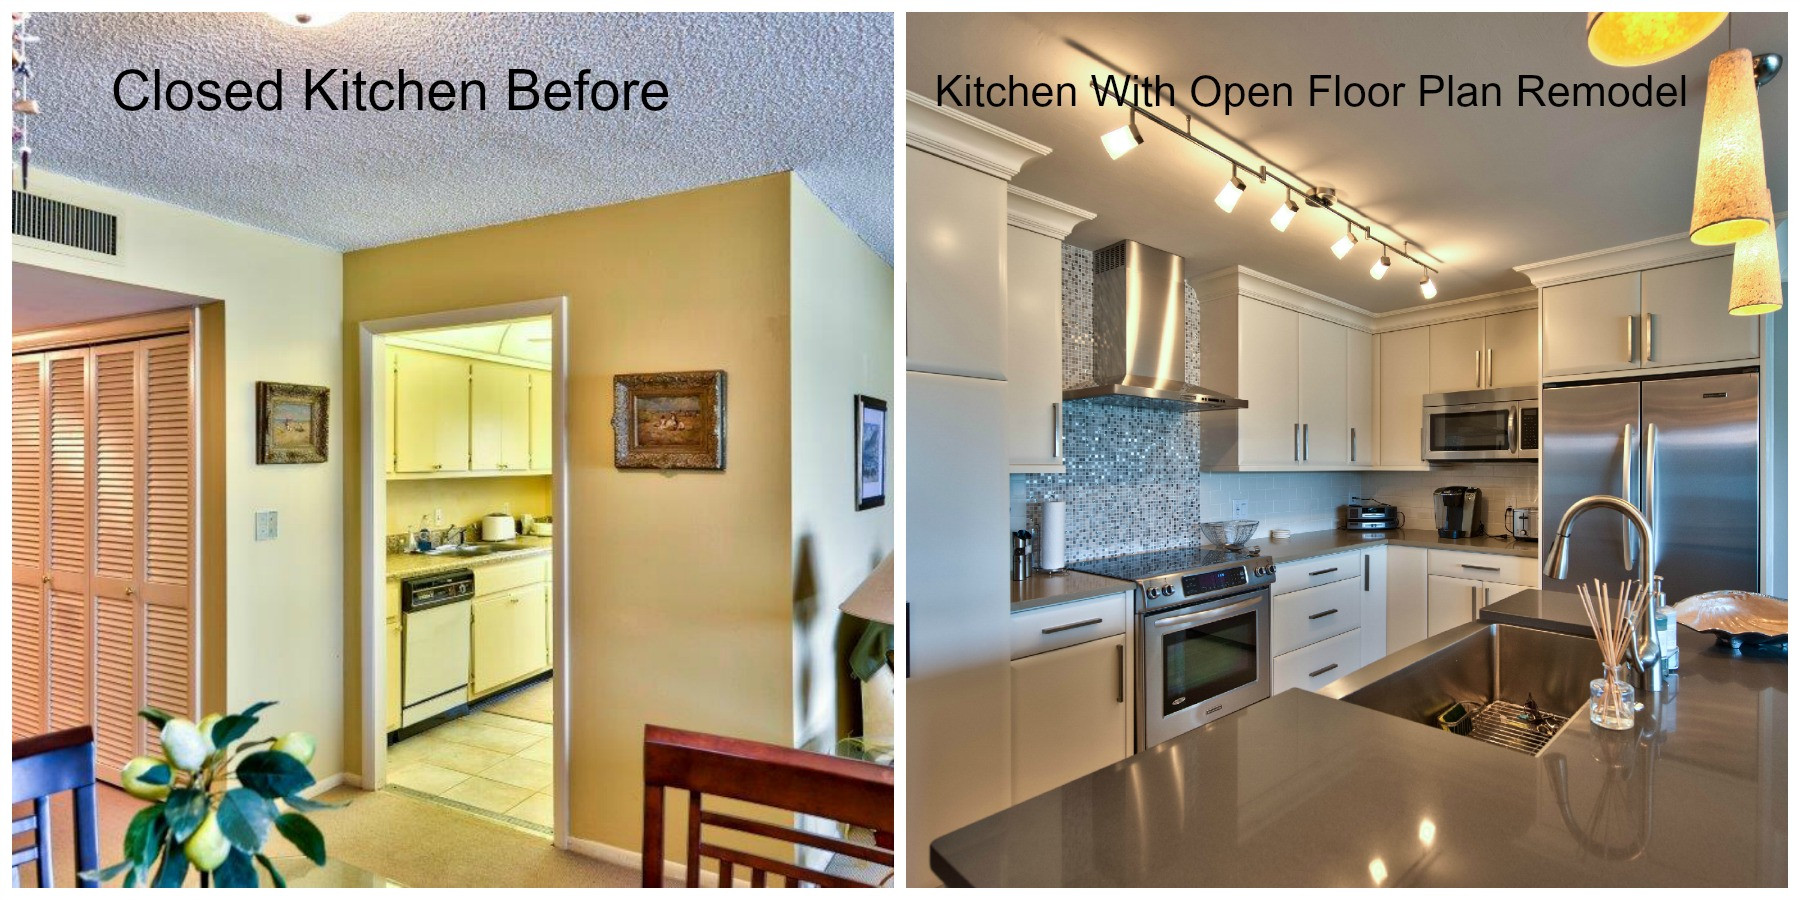 Kitchen Remodels Before And After
 Kitchen Before and After s